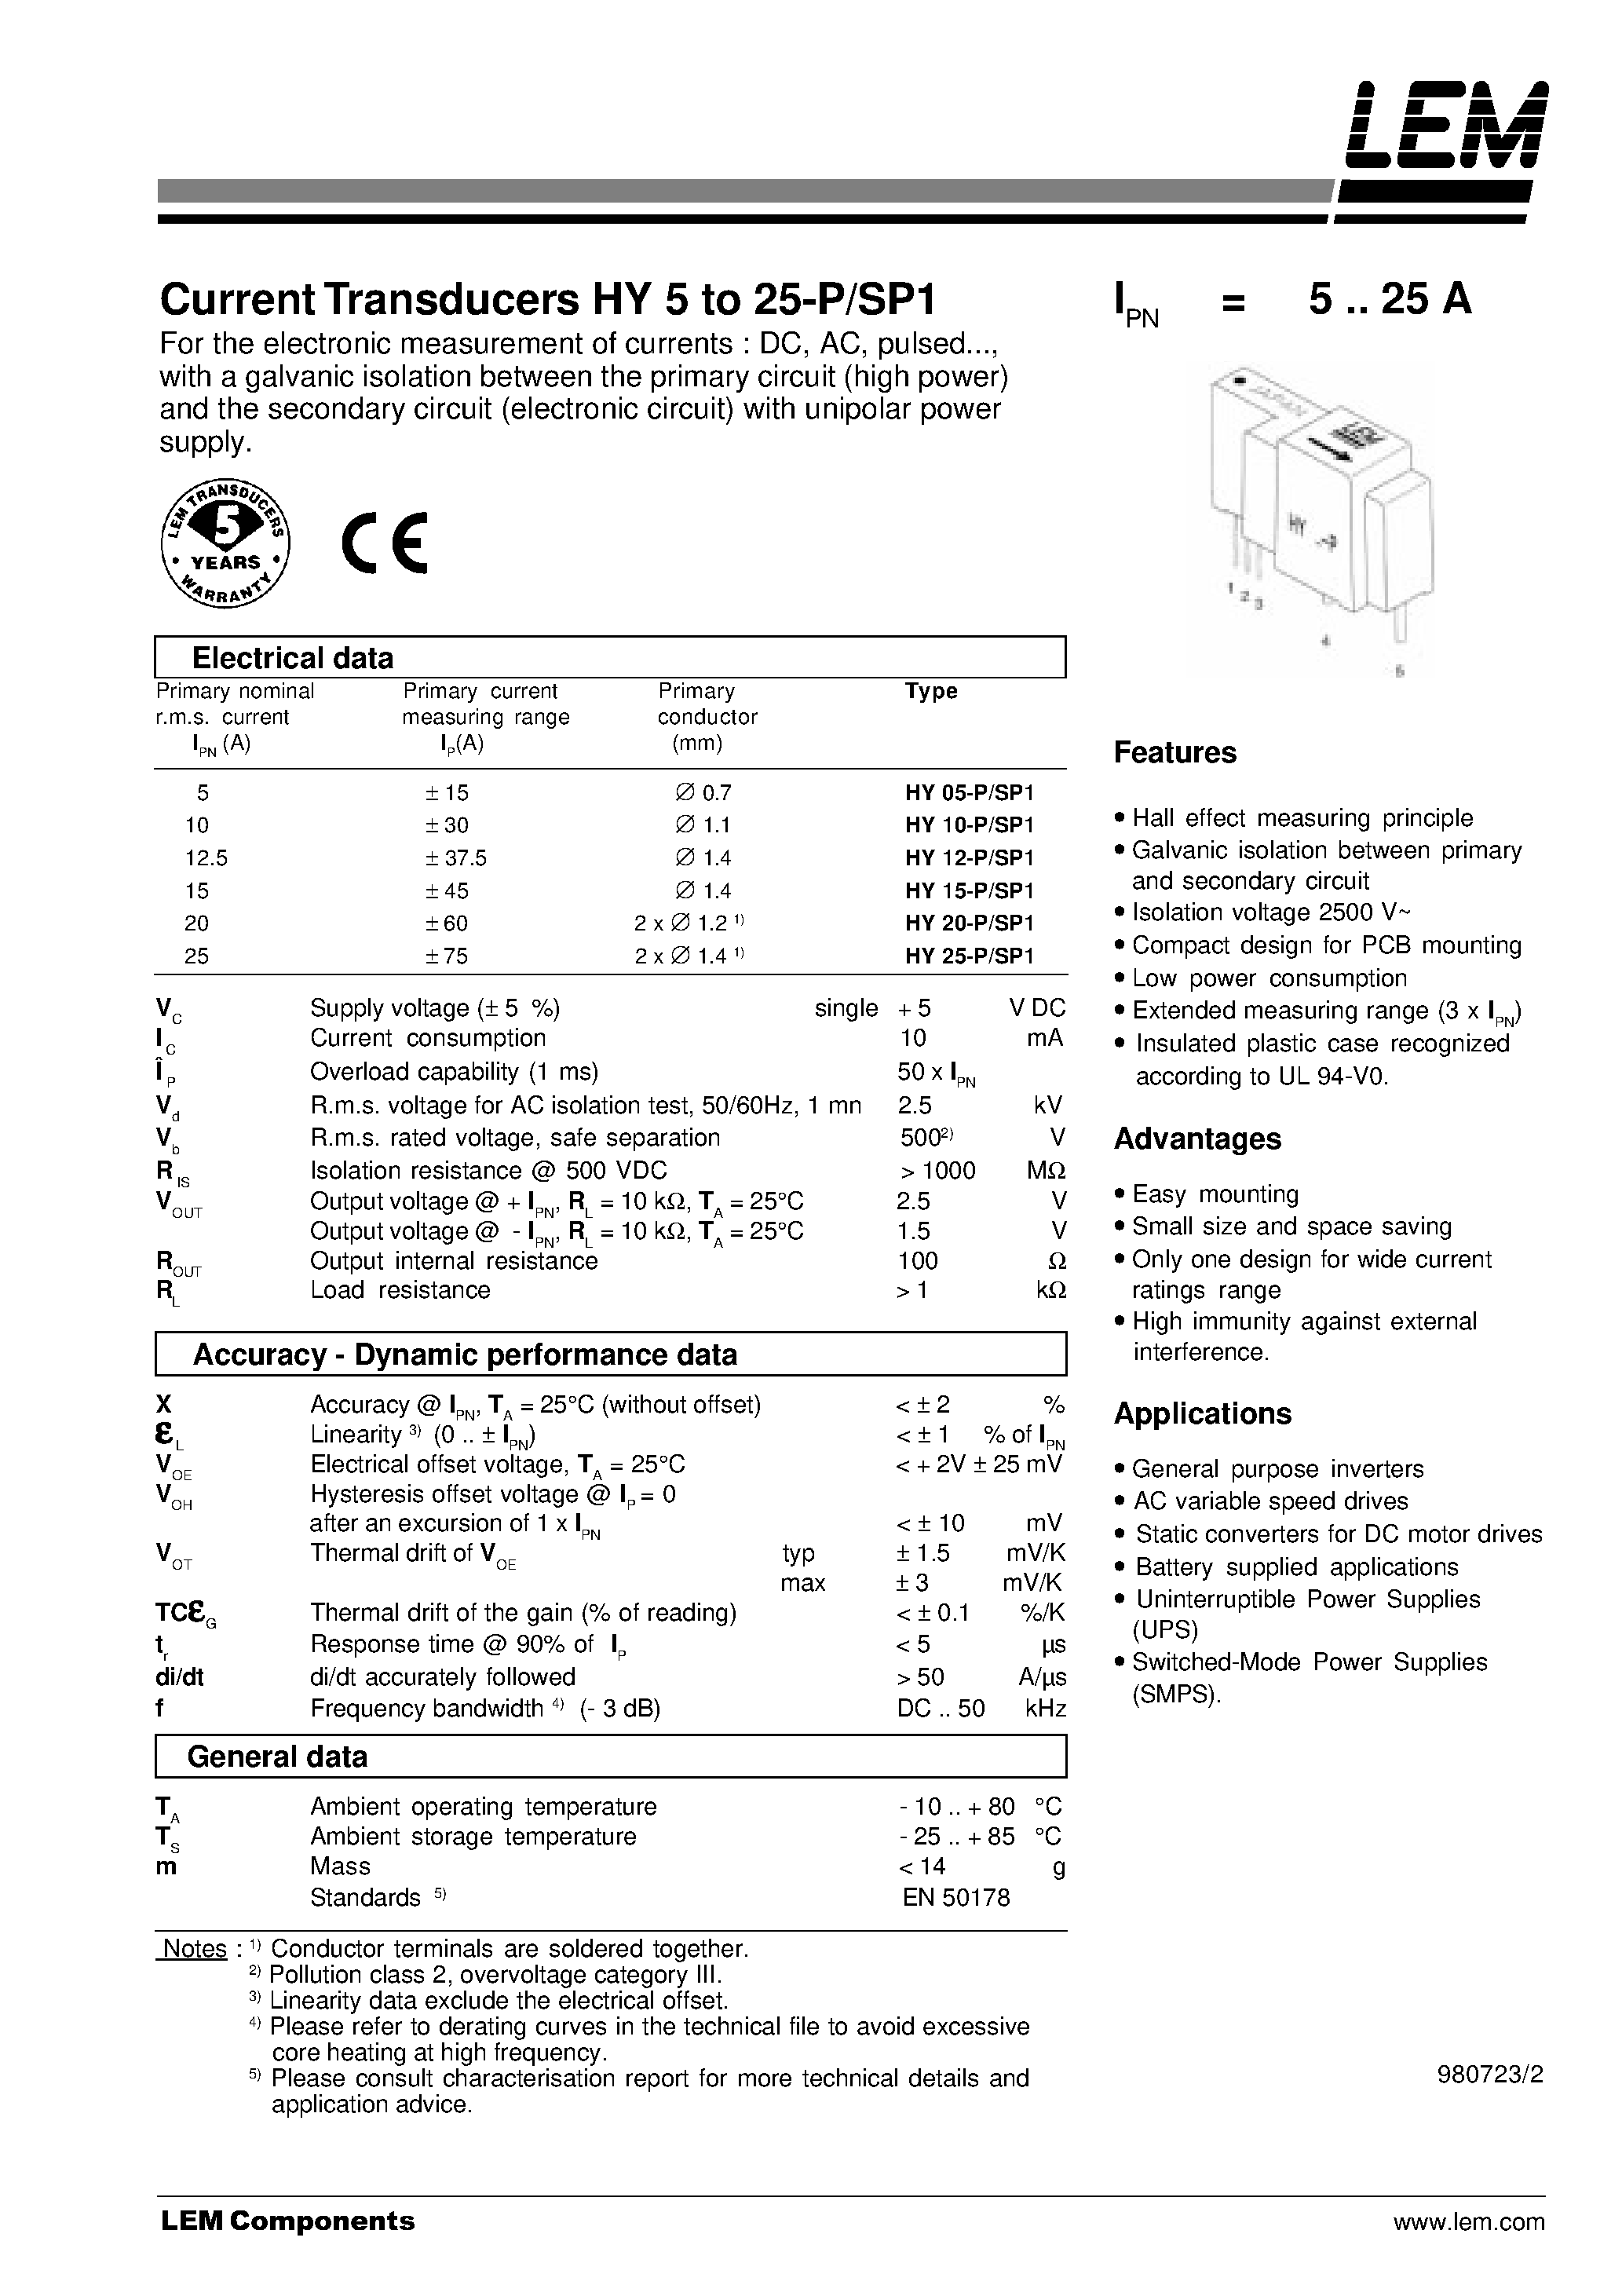 Datasheet HY05-P/SP1 - Current Transducers HY 5 to 25-P/SP1 page 1